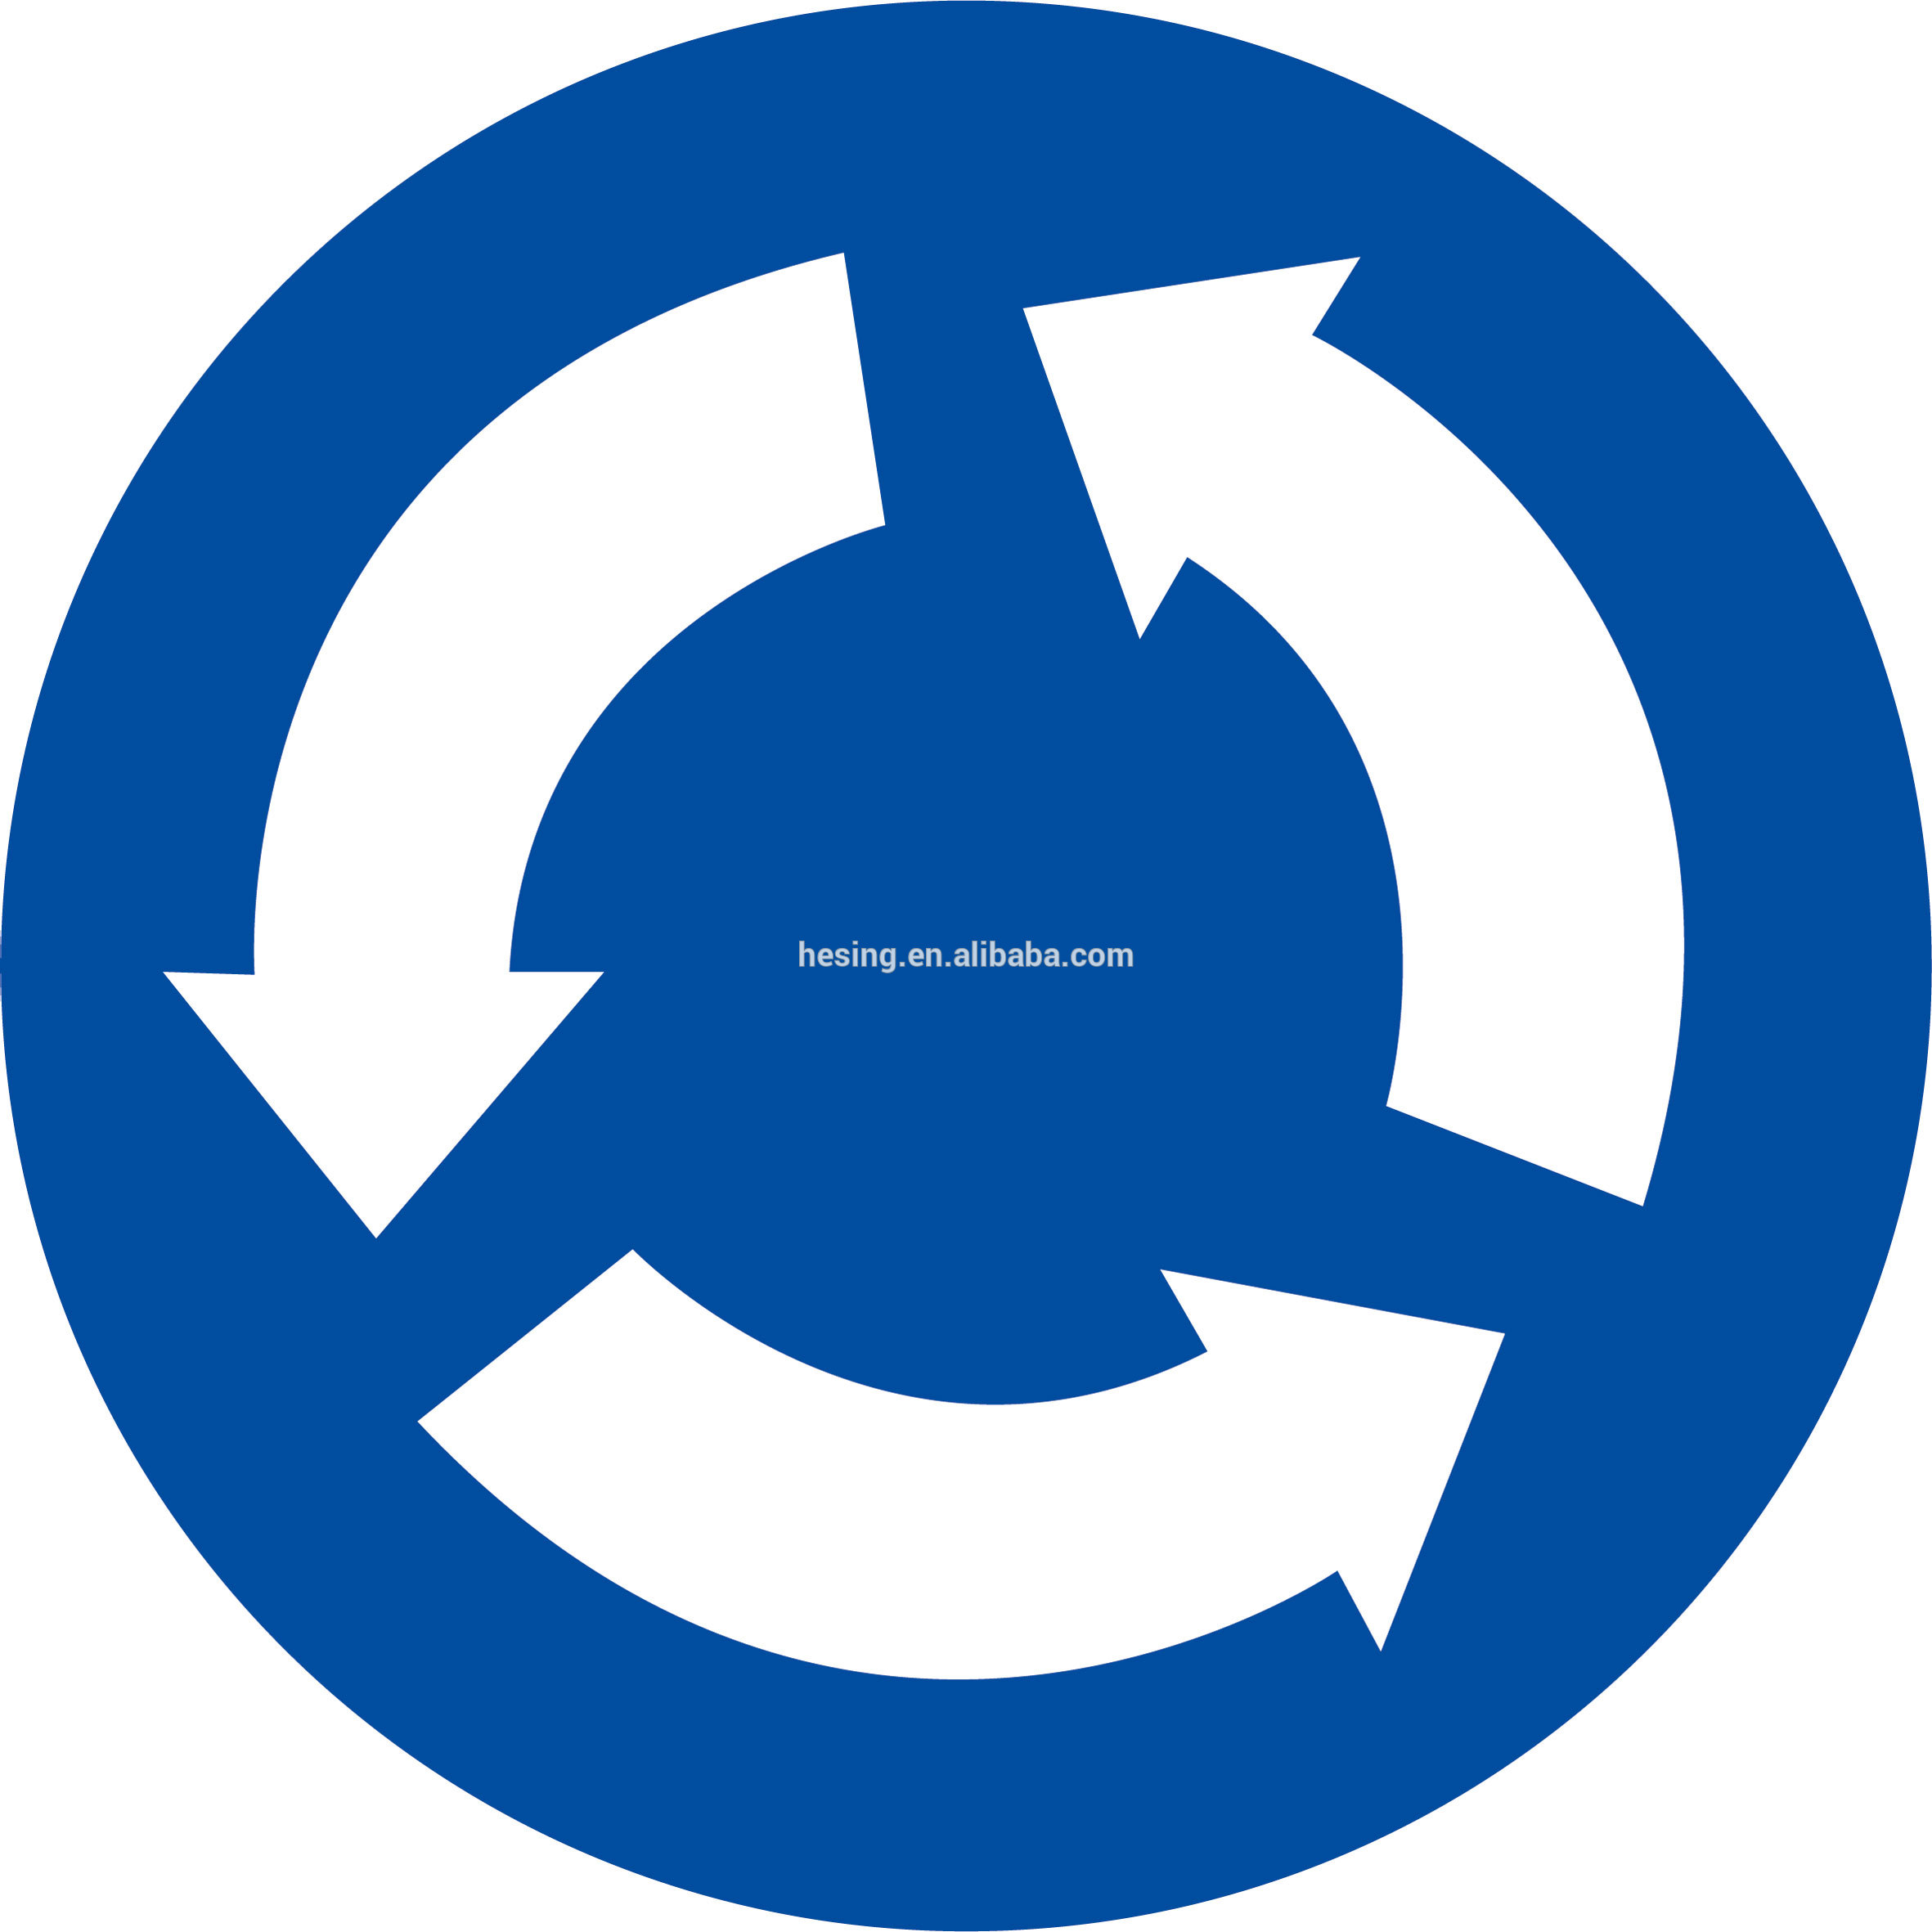 Symbols Of Road Signs Products - Symbols Of Road Signs ...